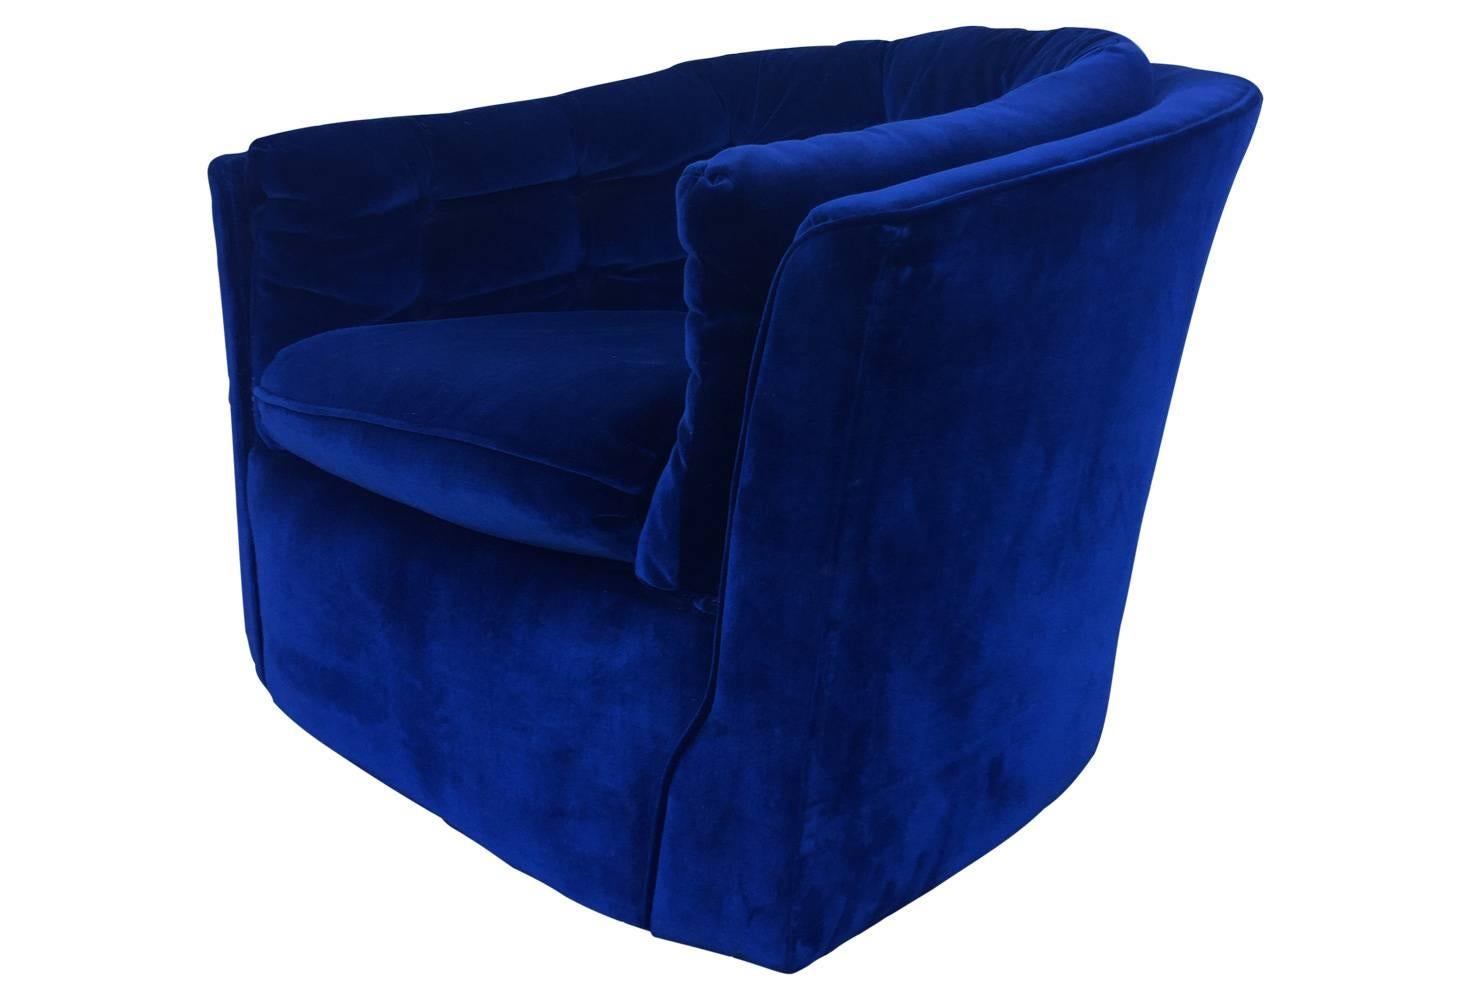 This deep blue color is to die for! Adorable Mid-Century swivel chair in a rich velvet with button detail. Overall great condition, no holes or stains in original fabric.